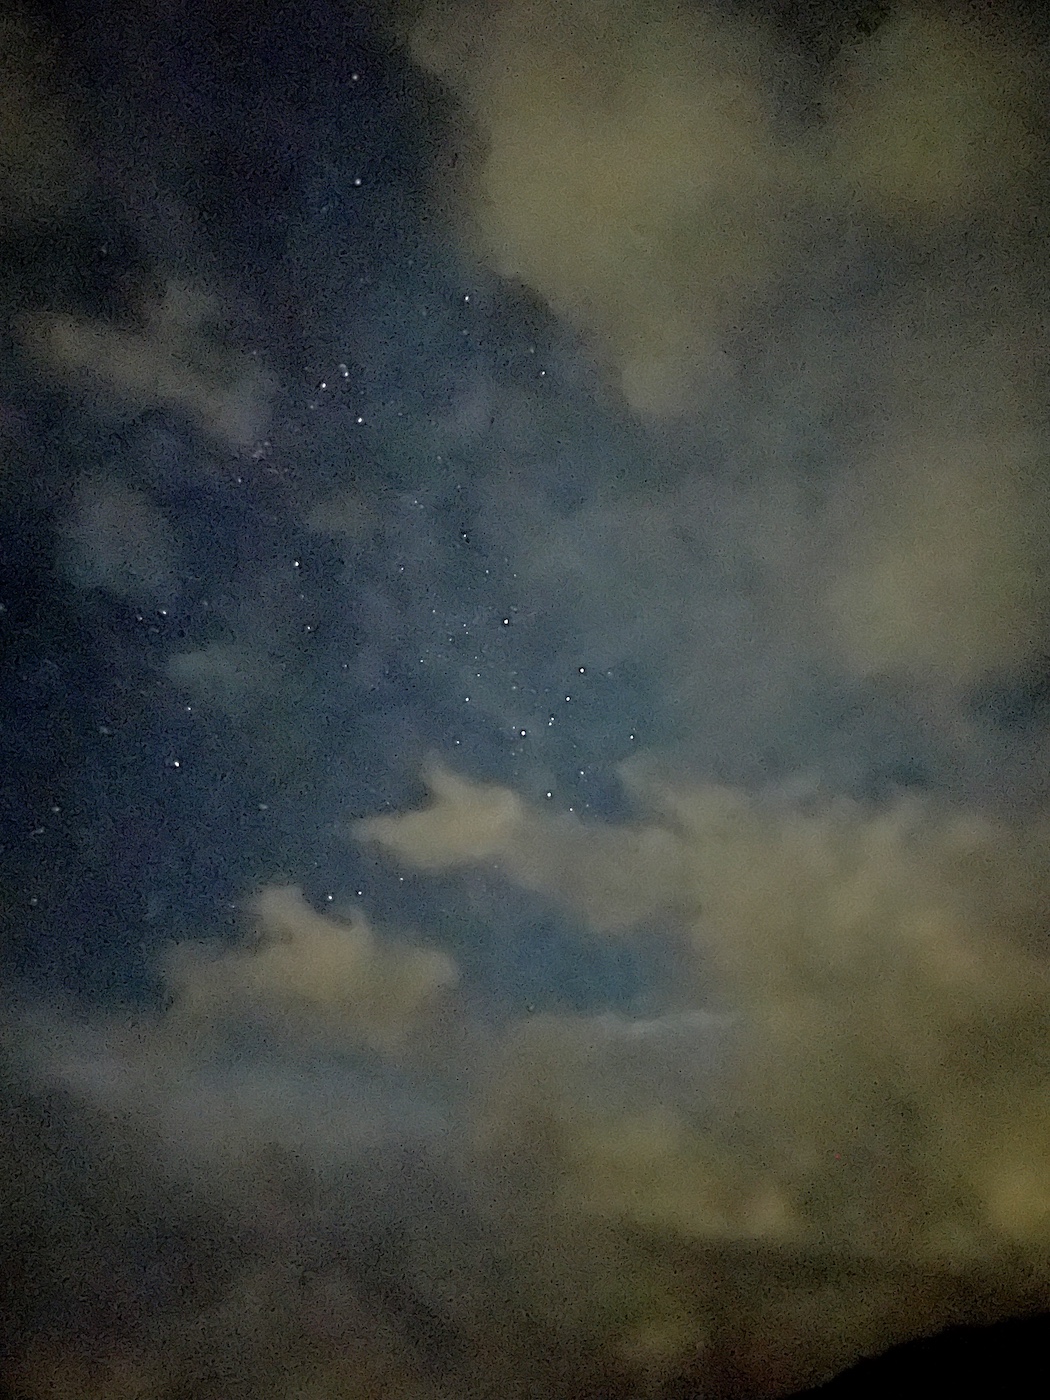 Another shot of a starfield and clouds through my iphone camera